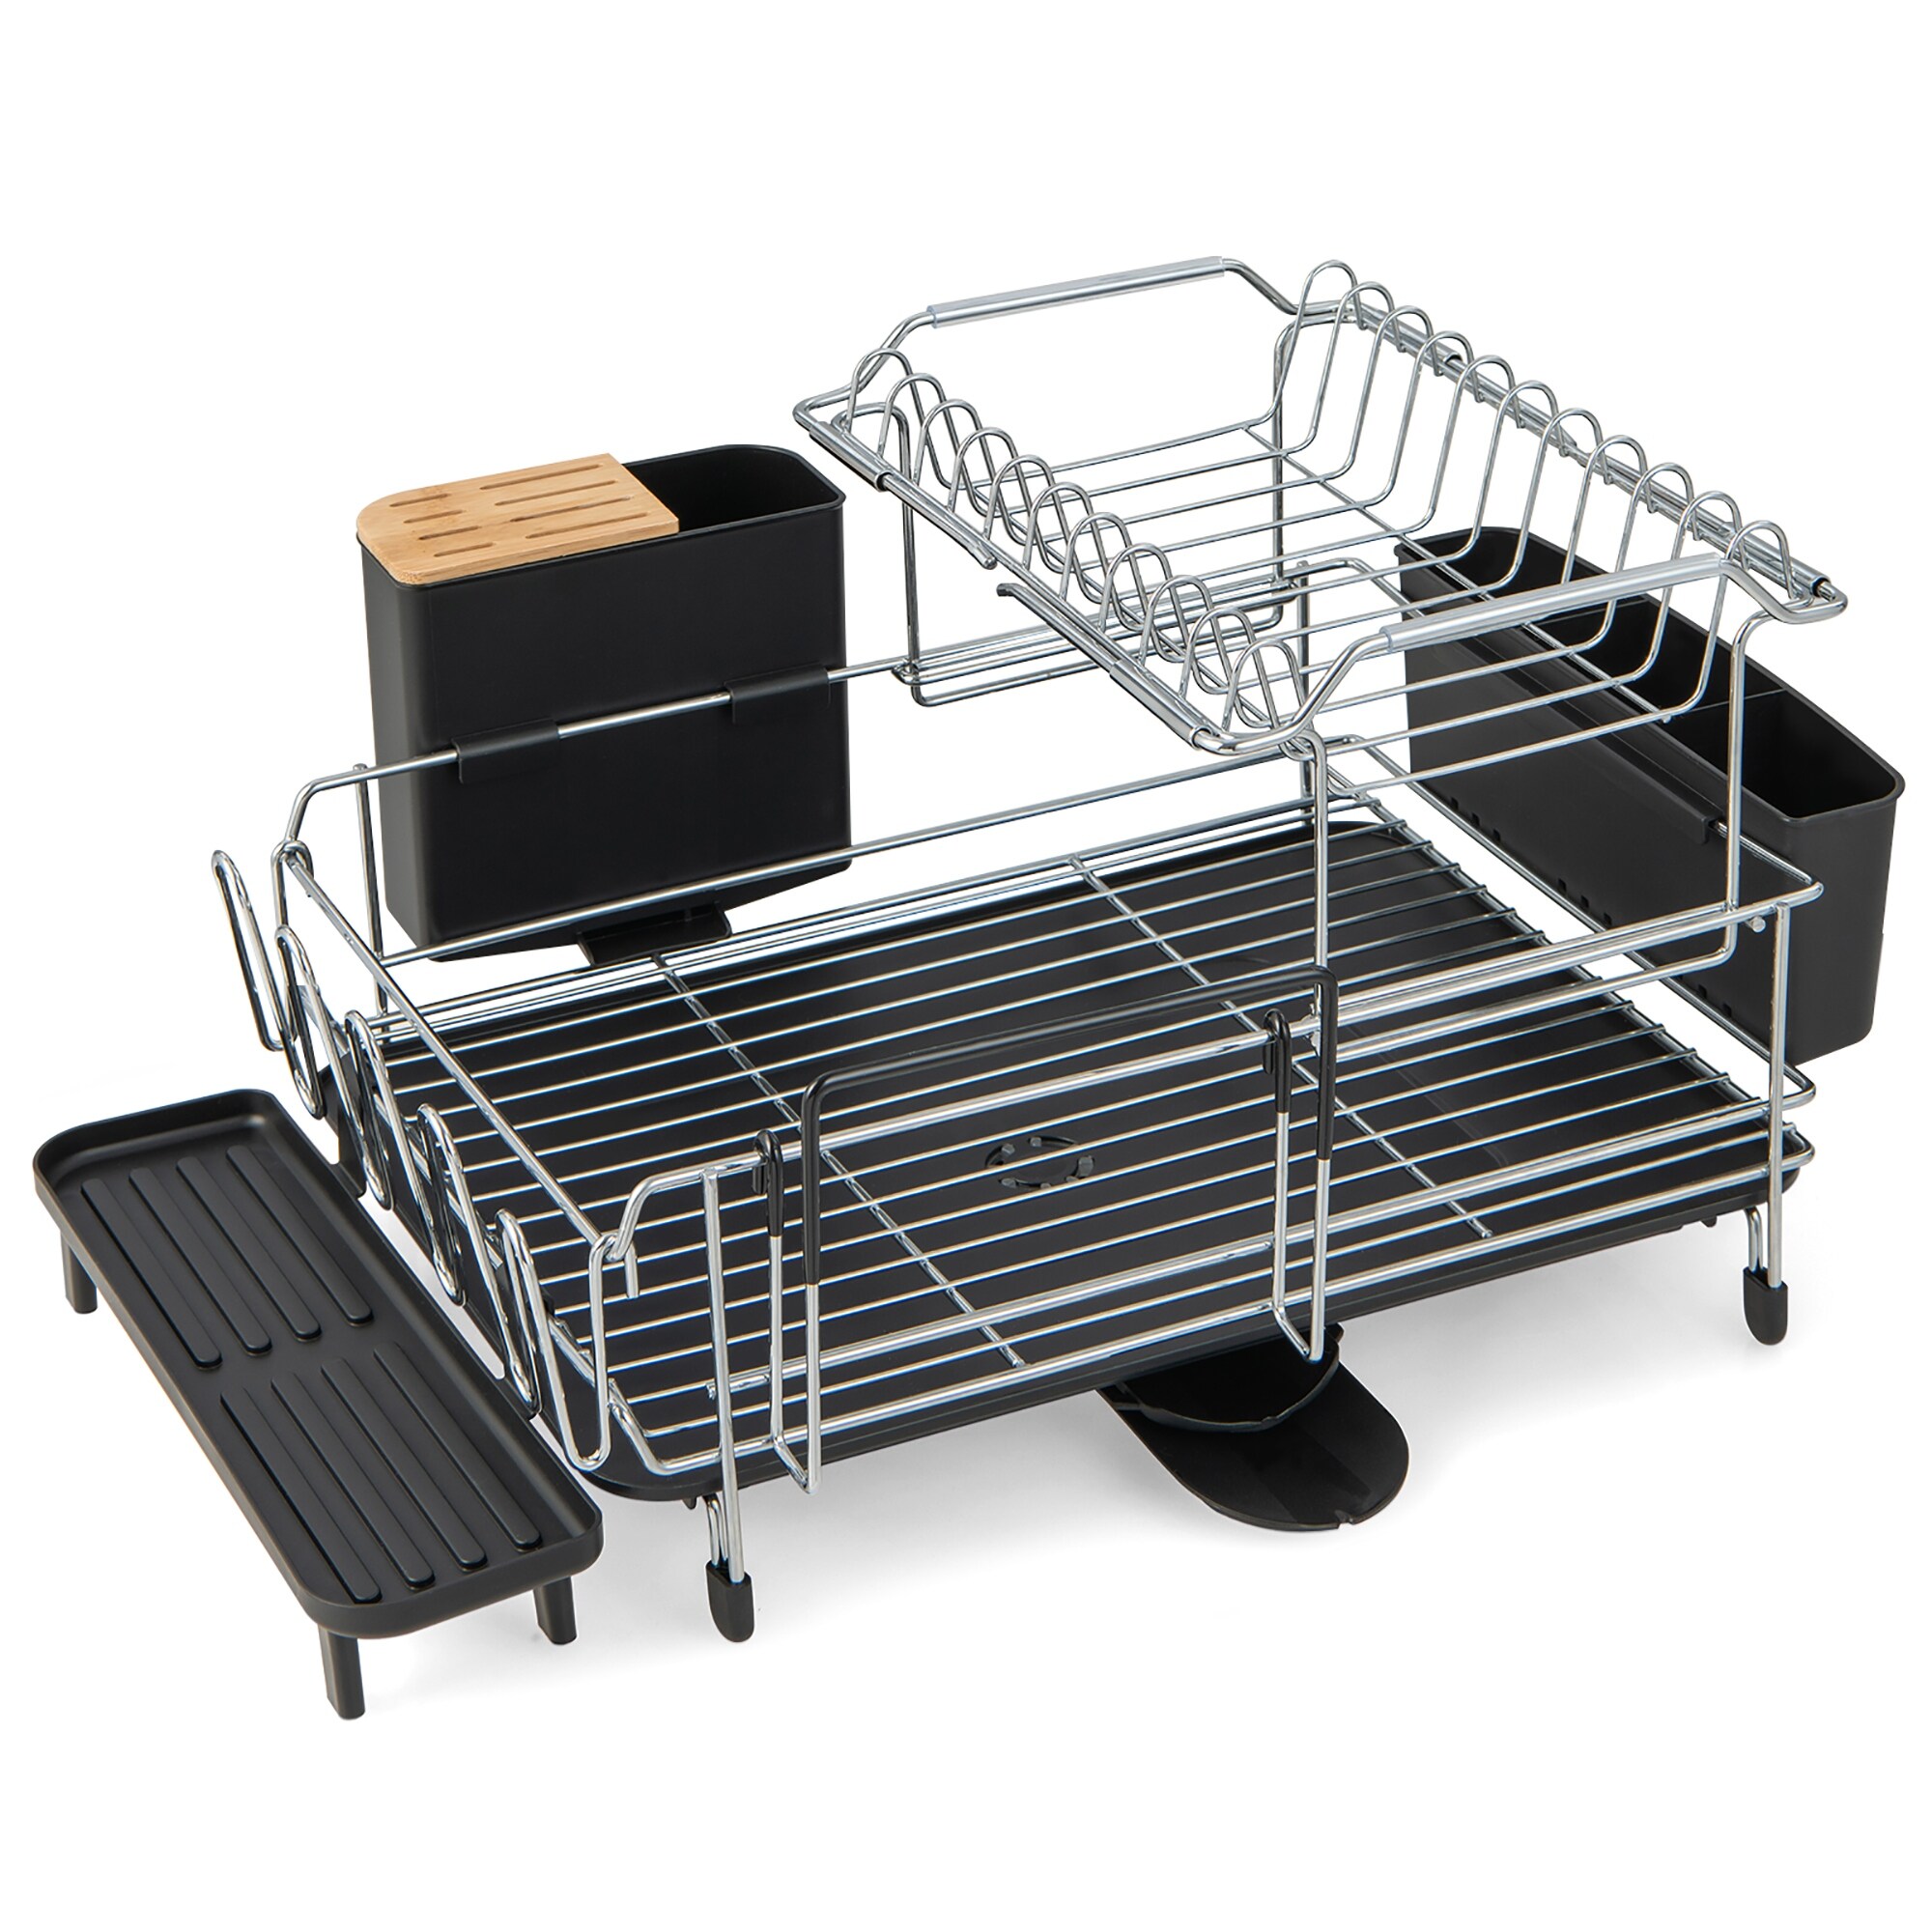 Rust Proof Dish Drying Rack with Plastic Drainboard and Utensil